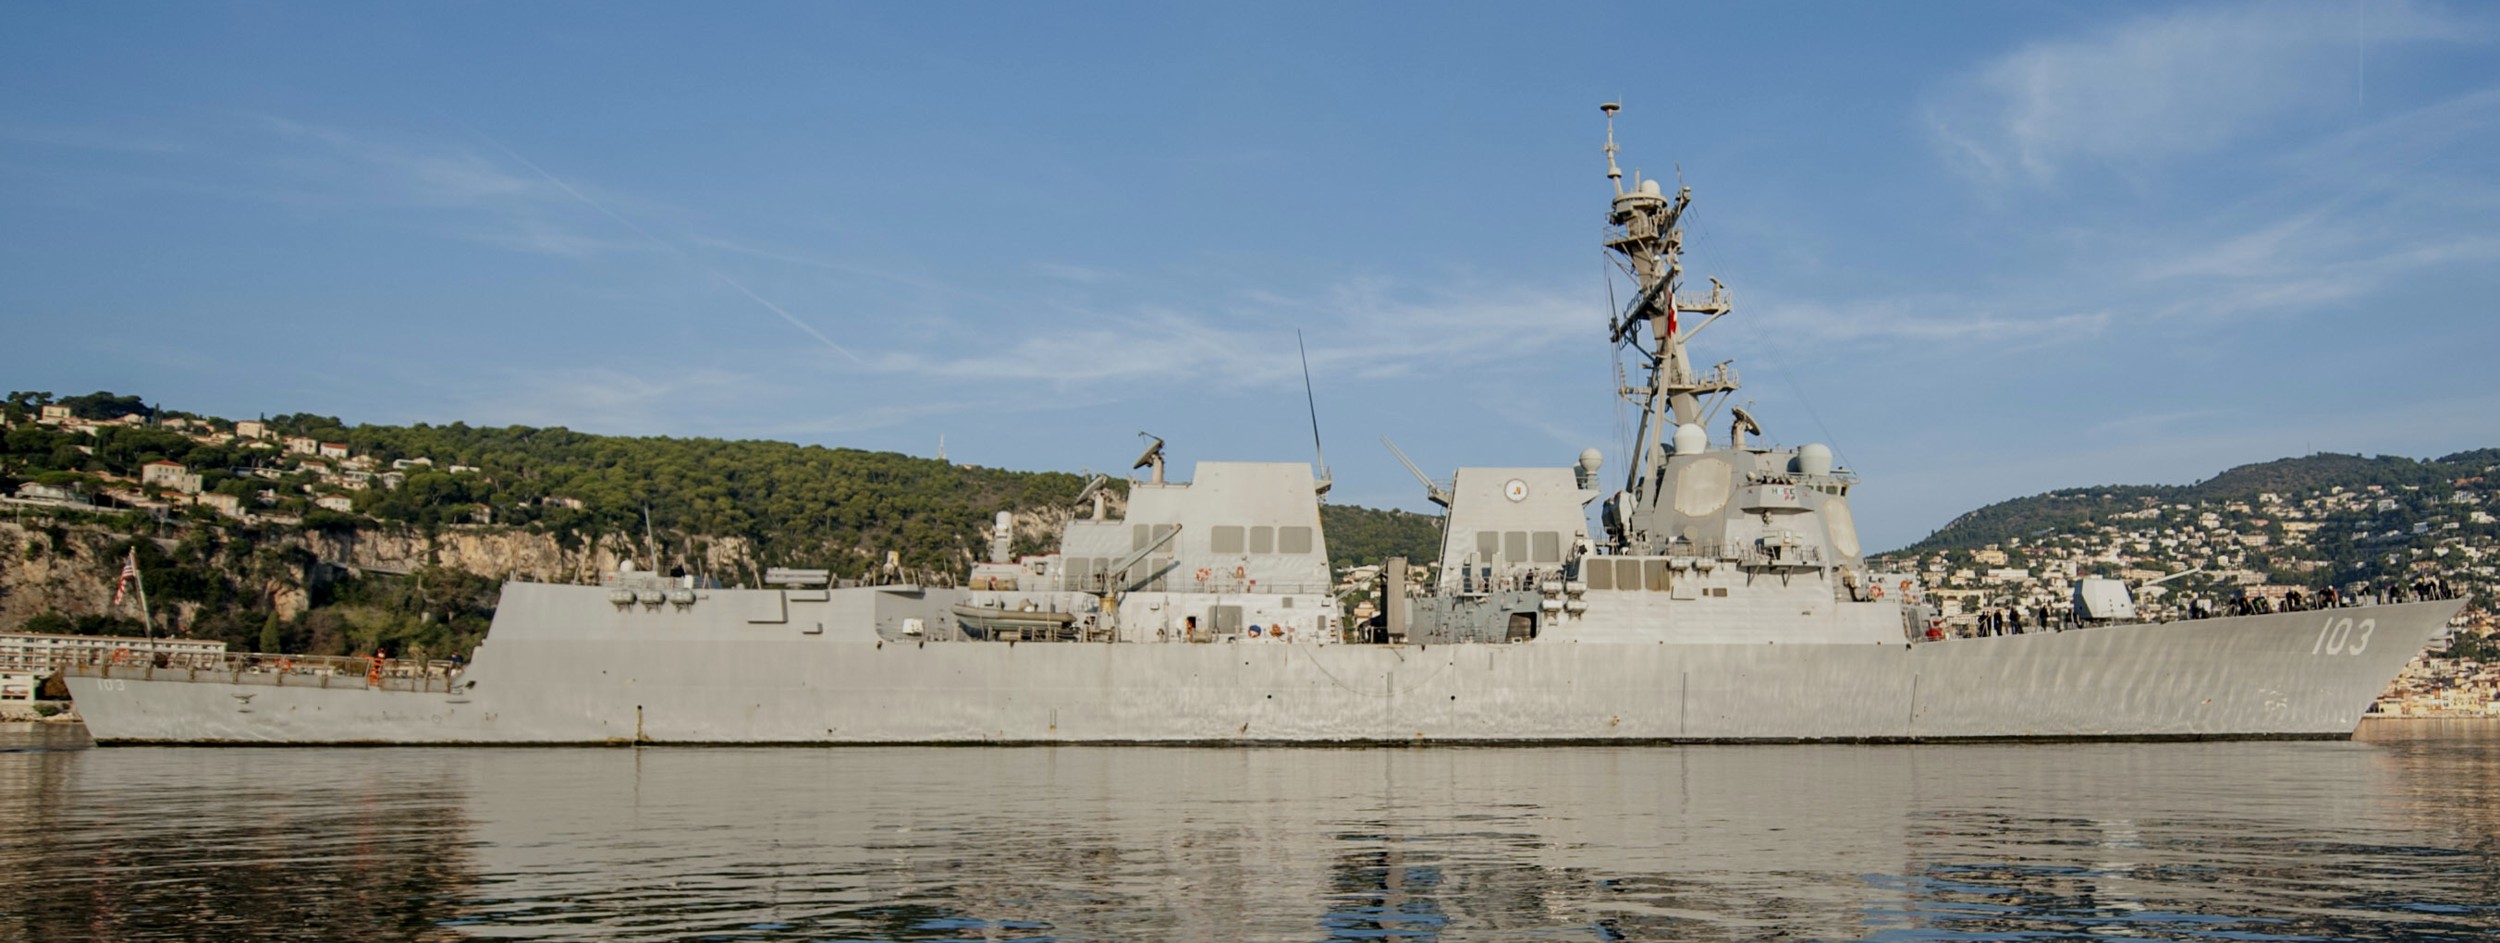 ddg-103 uss truxtun arleigh burke class guided missile destroyer aegis us navy villefranche france 10